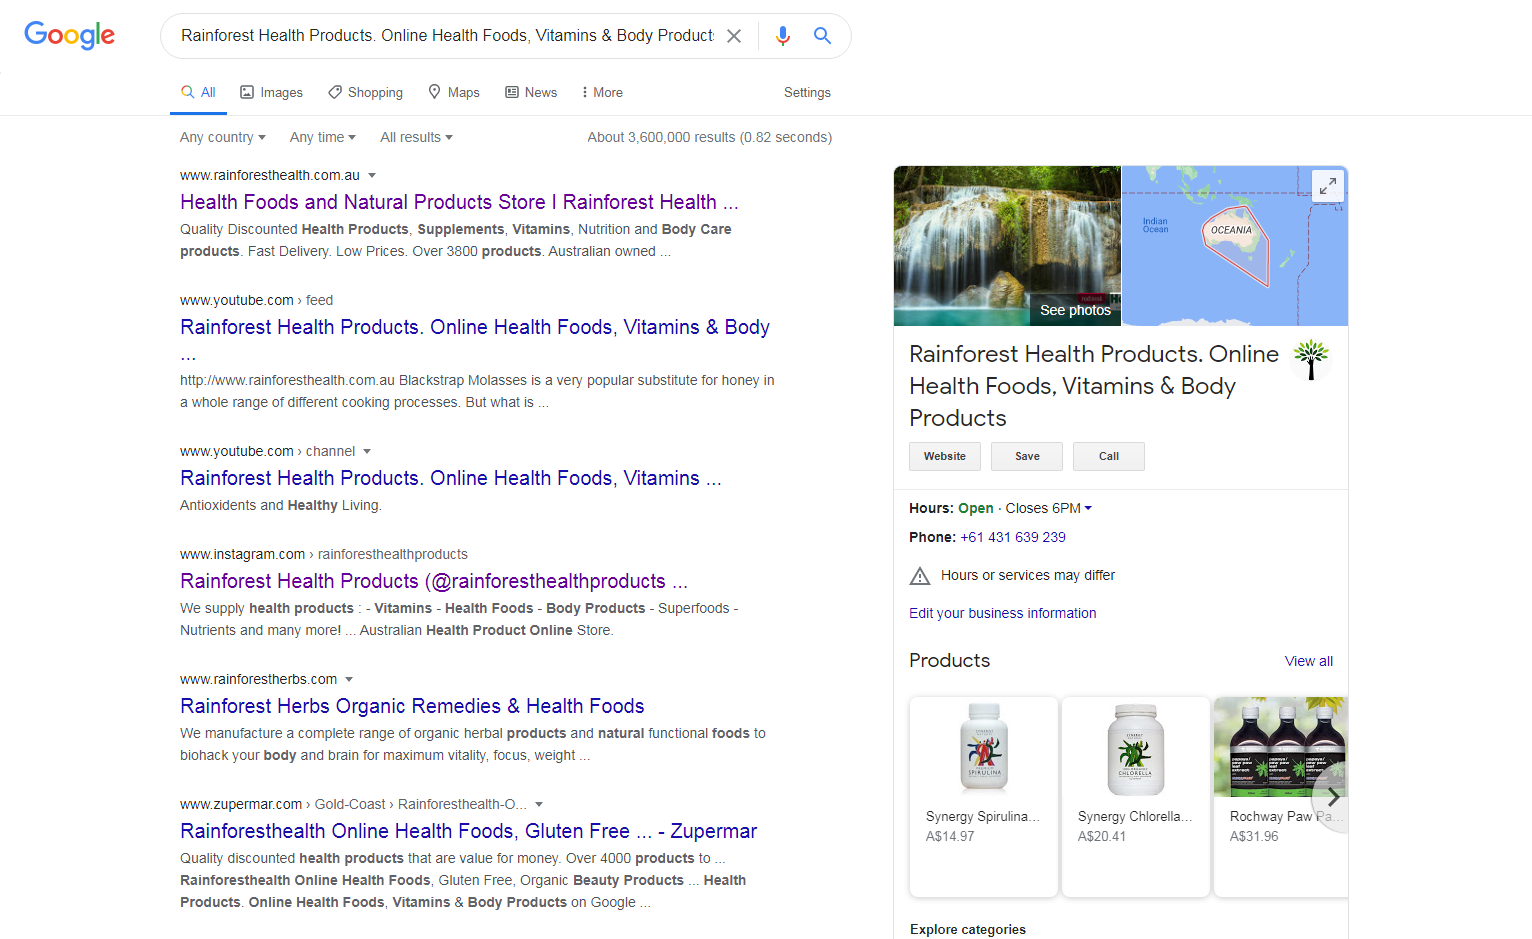 Rainforest Health Products - Google My Business - Top4 Marketing